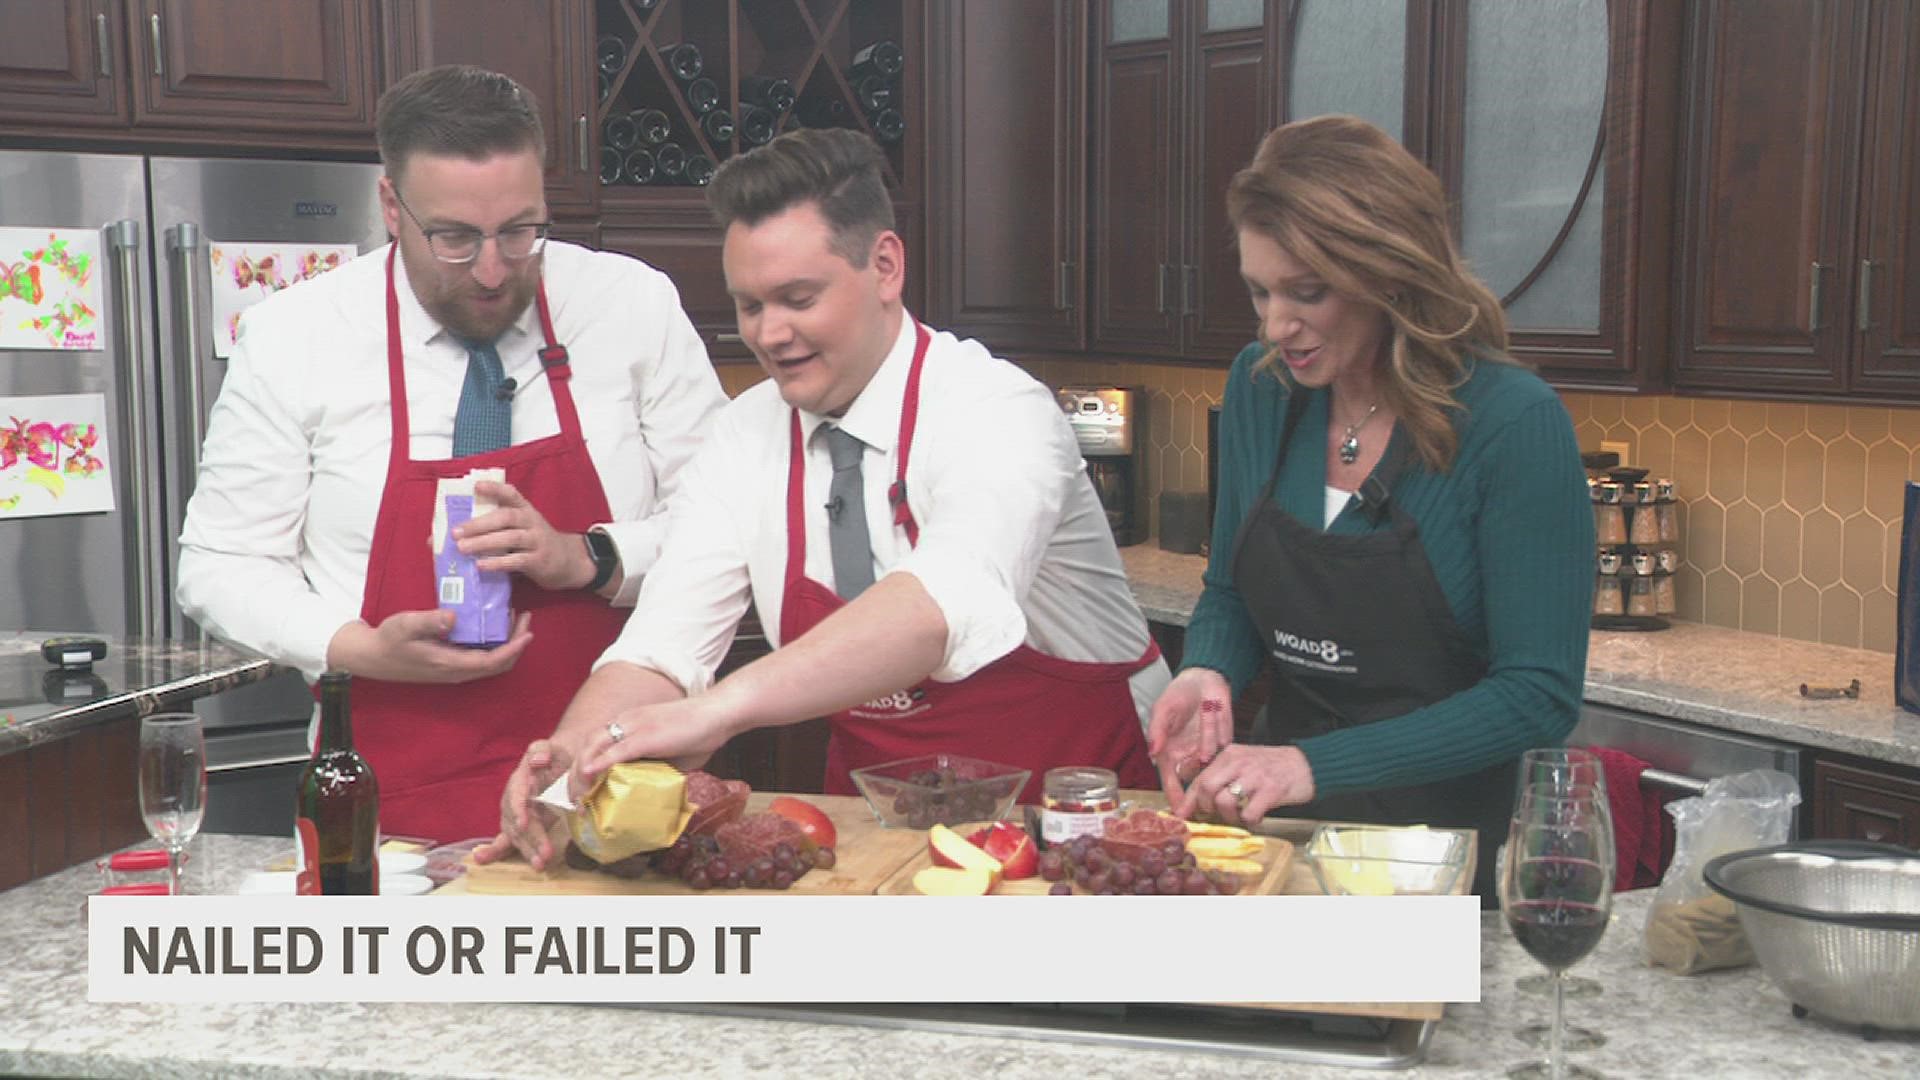 Good Morning Quad Cities makes Charcuterie boards for 'Nailed it or Failed it'.